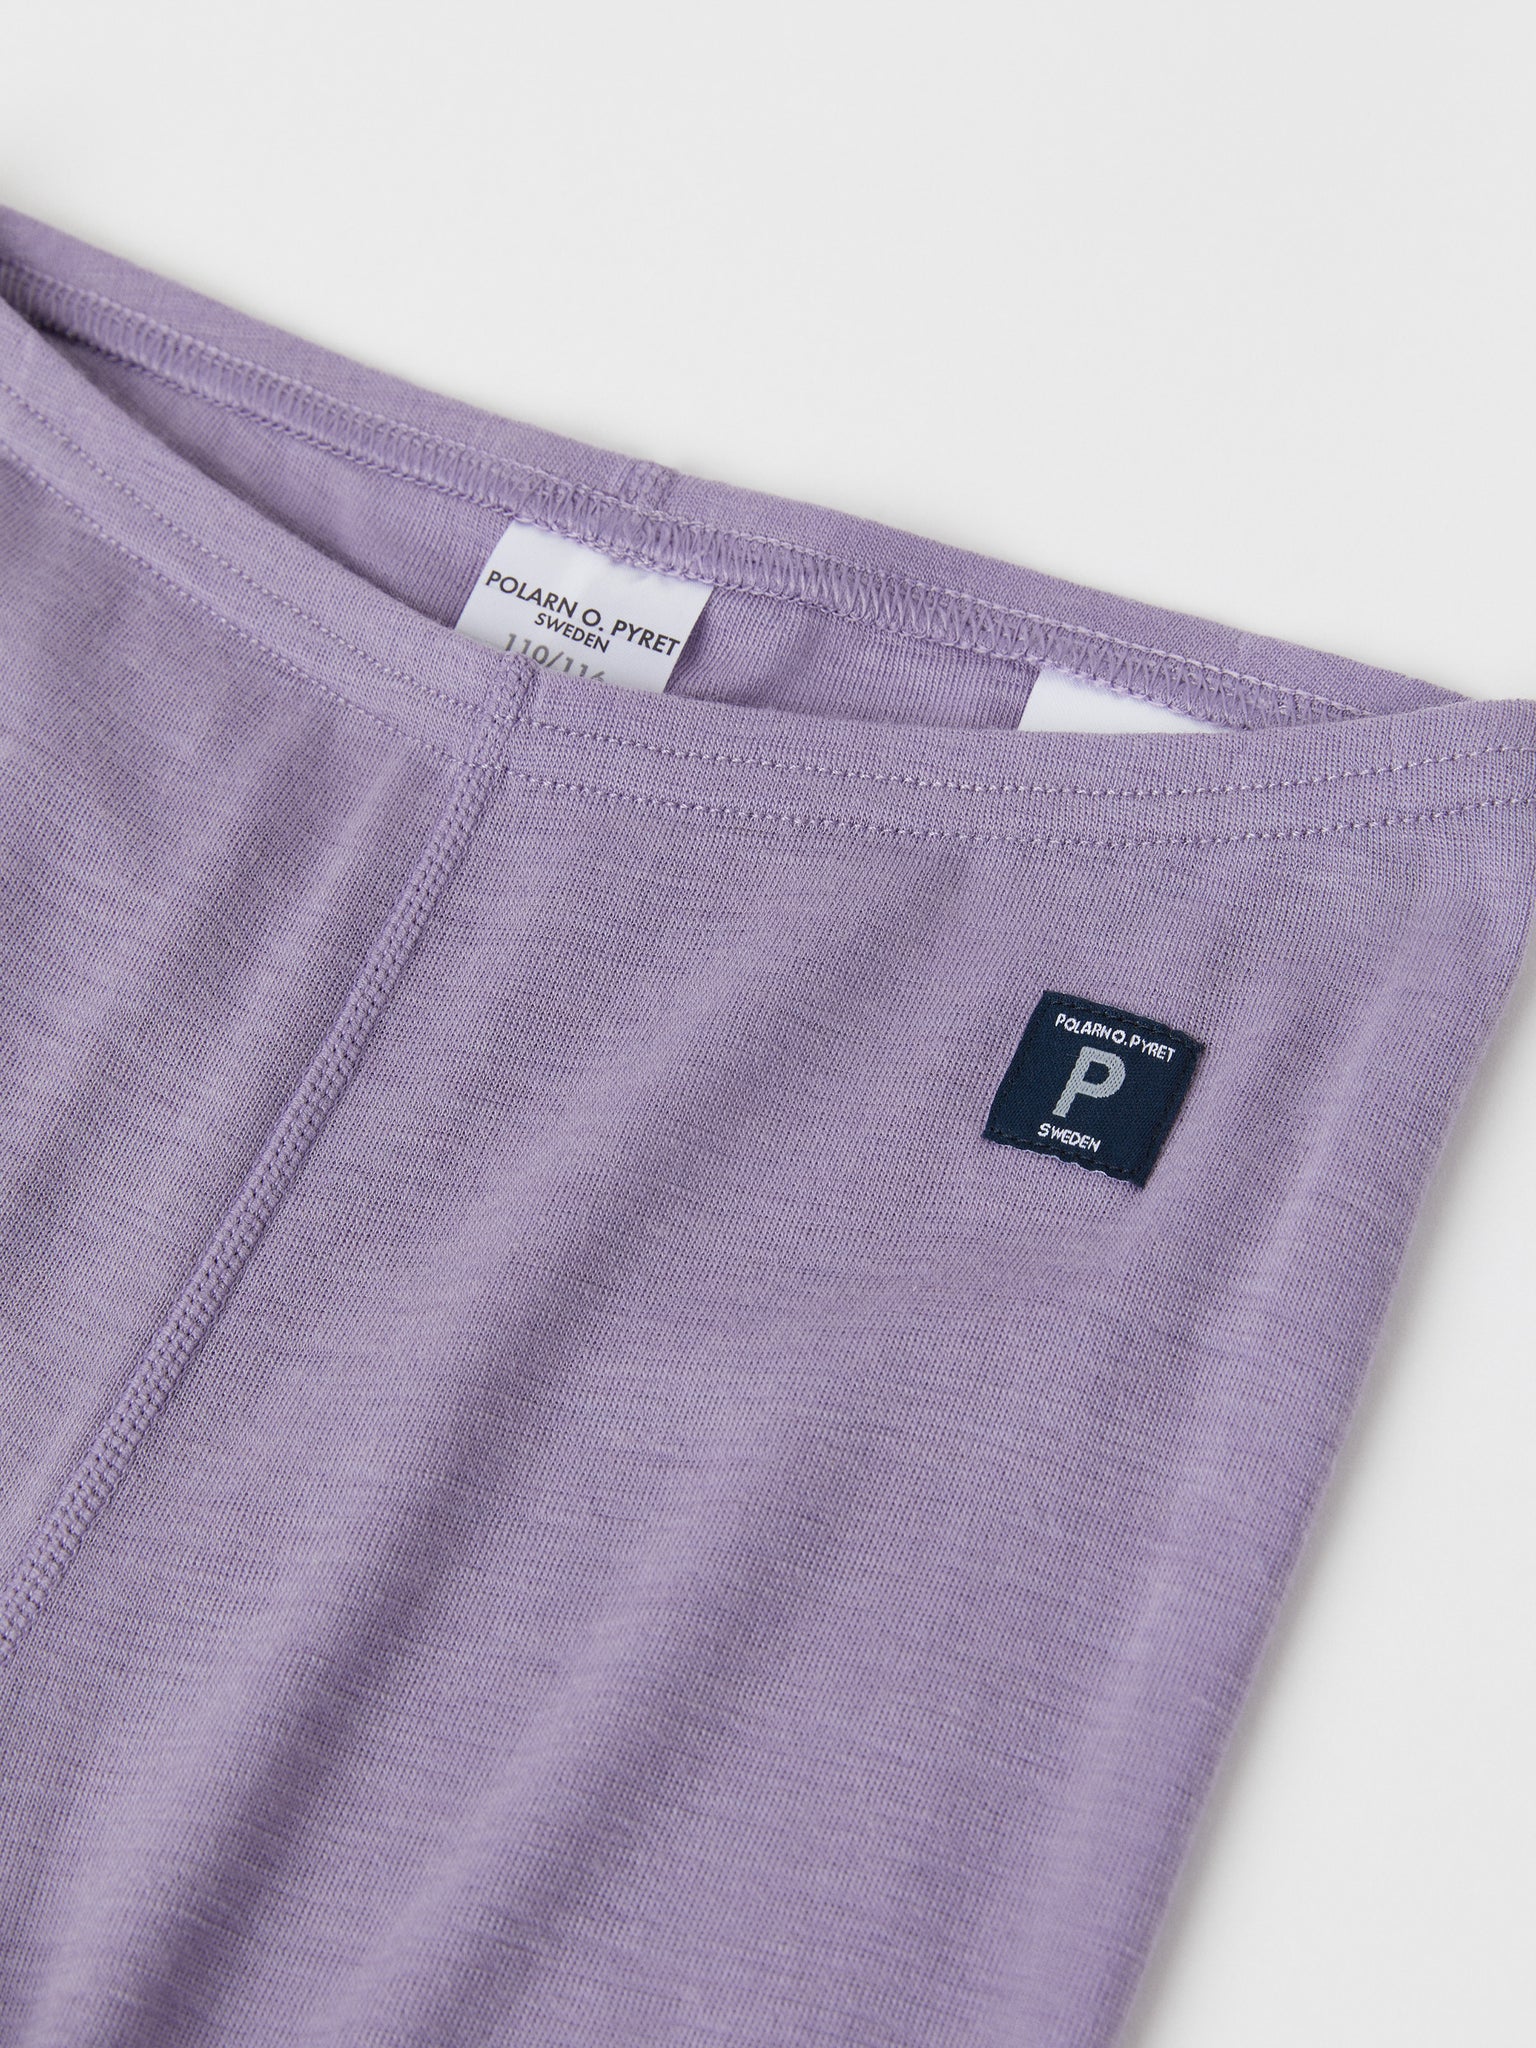 Purple Merino Kids Thermal Leggings from the Polarn O. Pyret outerwear collection. Quality kids clothing made to last.